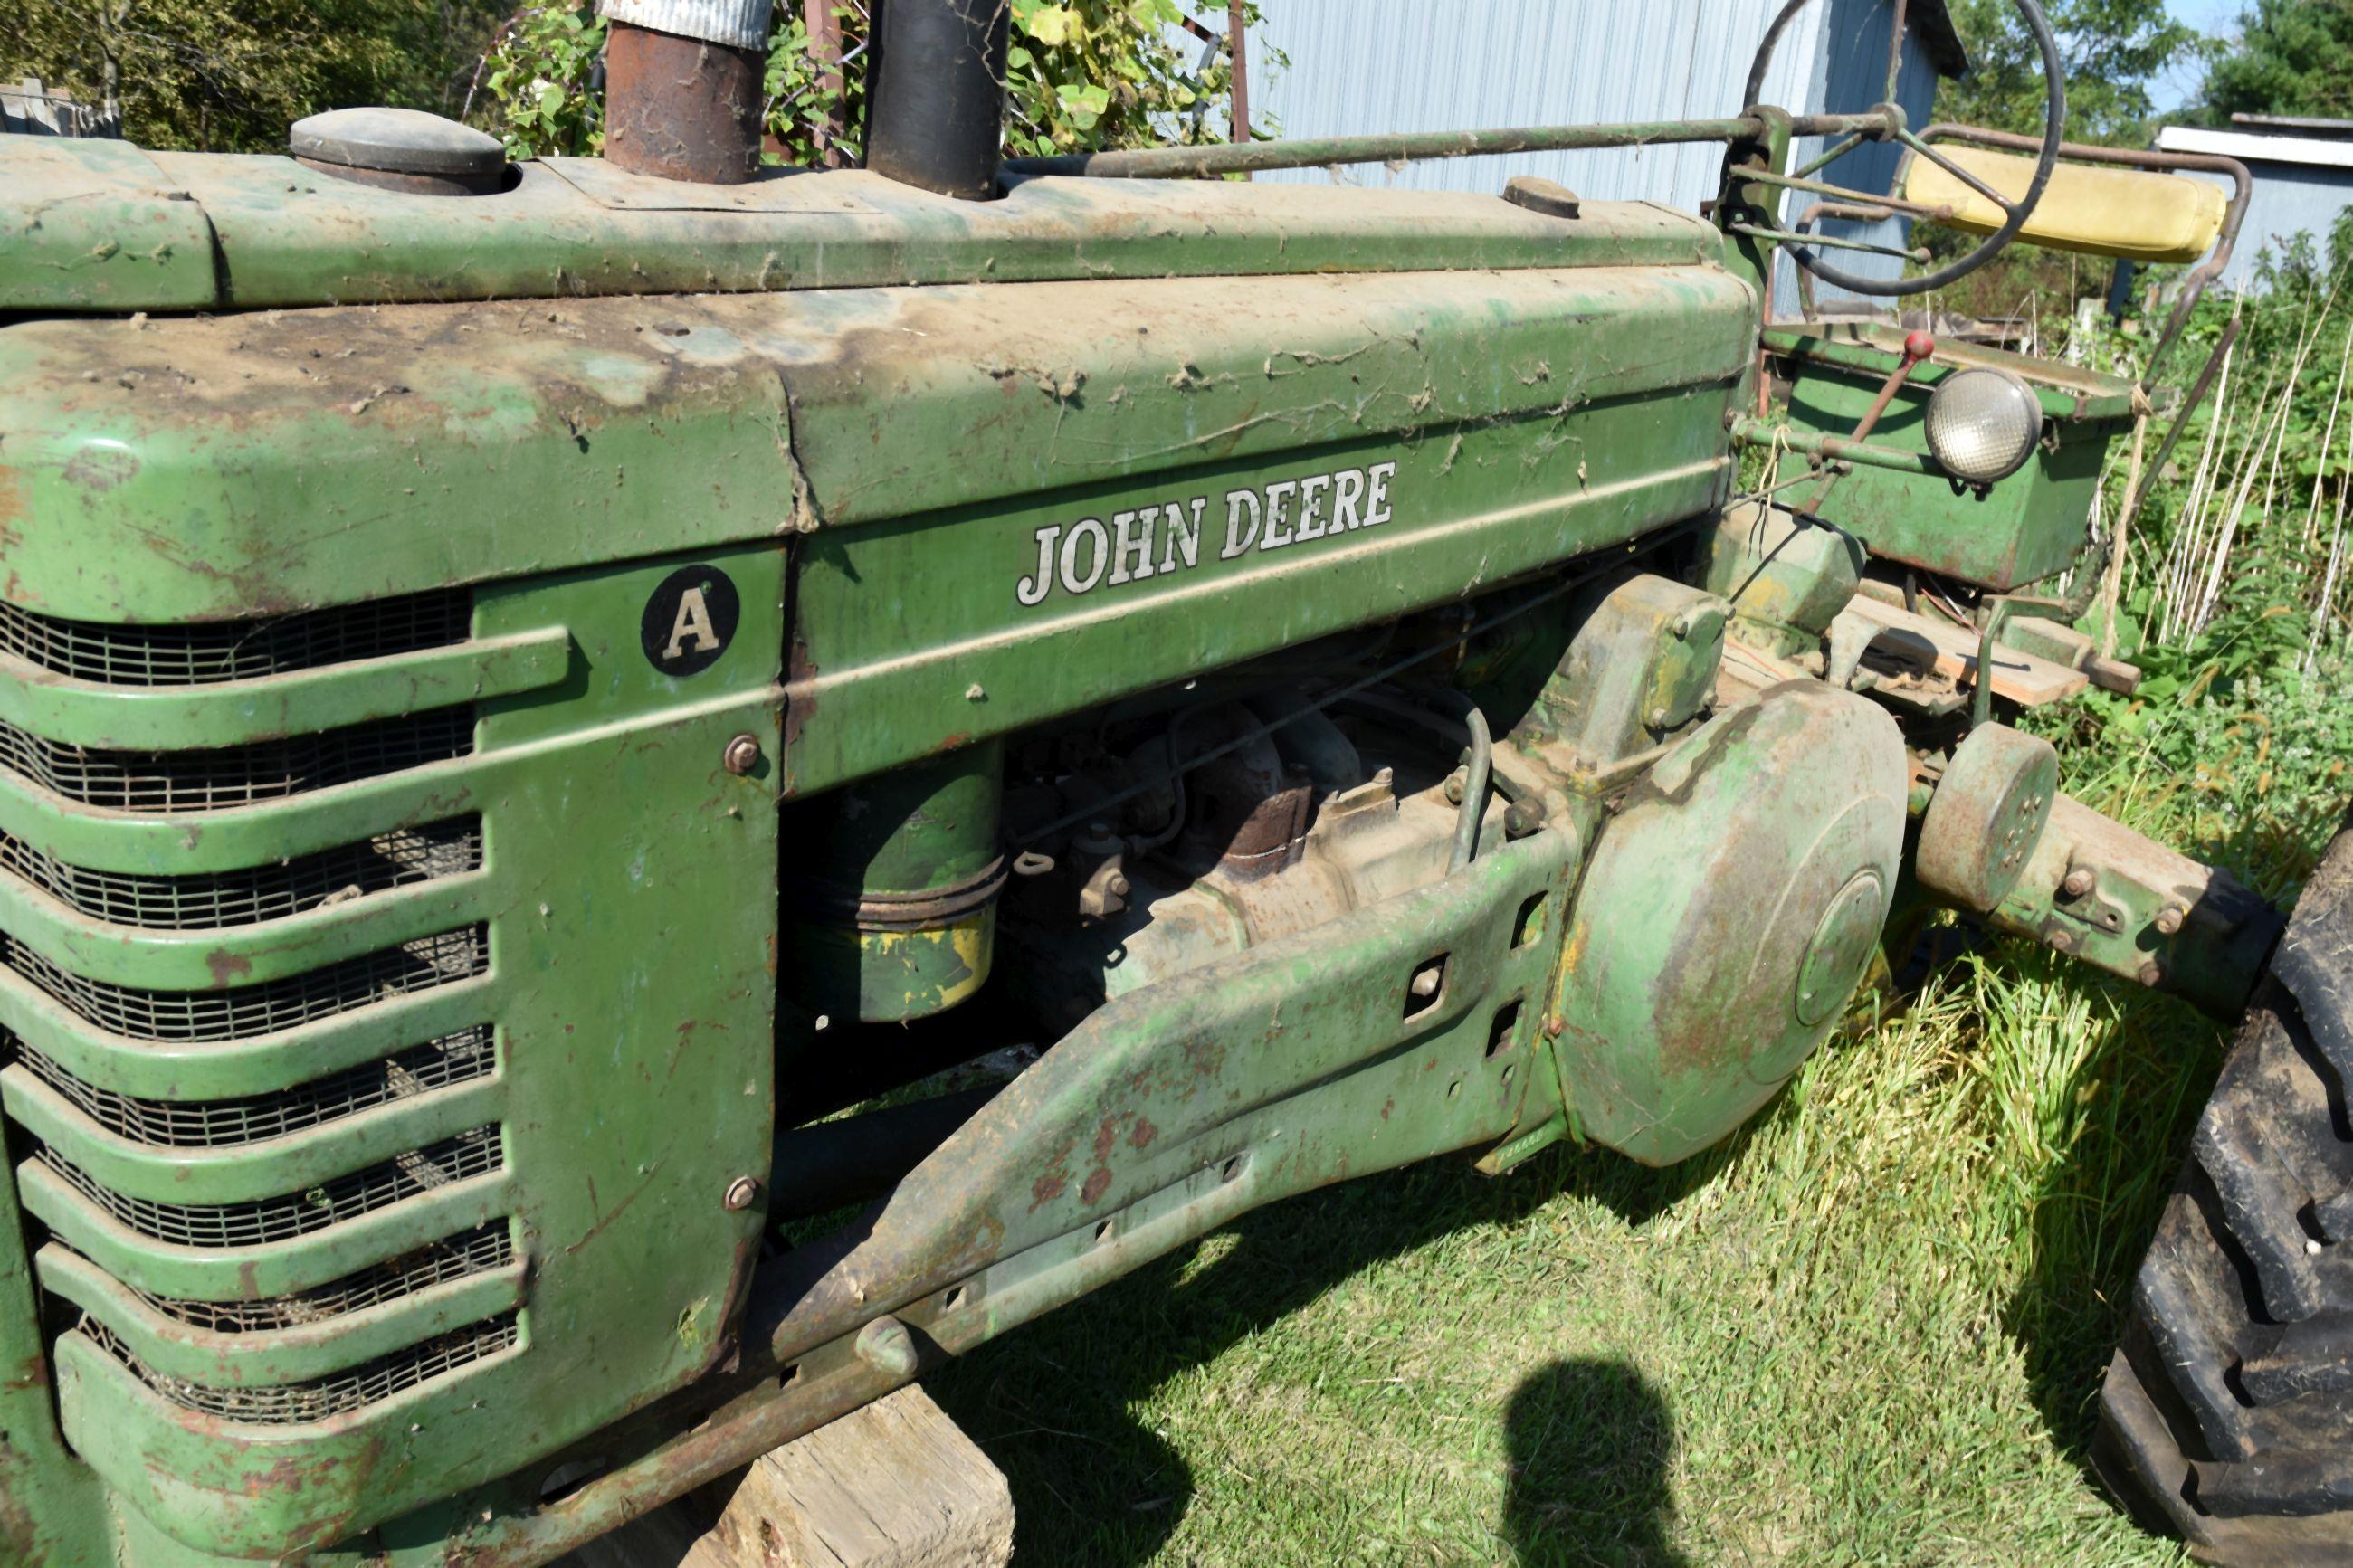 John Deere A Parts Tractor, Non-Running, 12.4x38 Tires, PTO, SN: 686343, No Front Tires